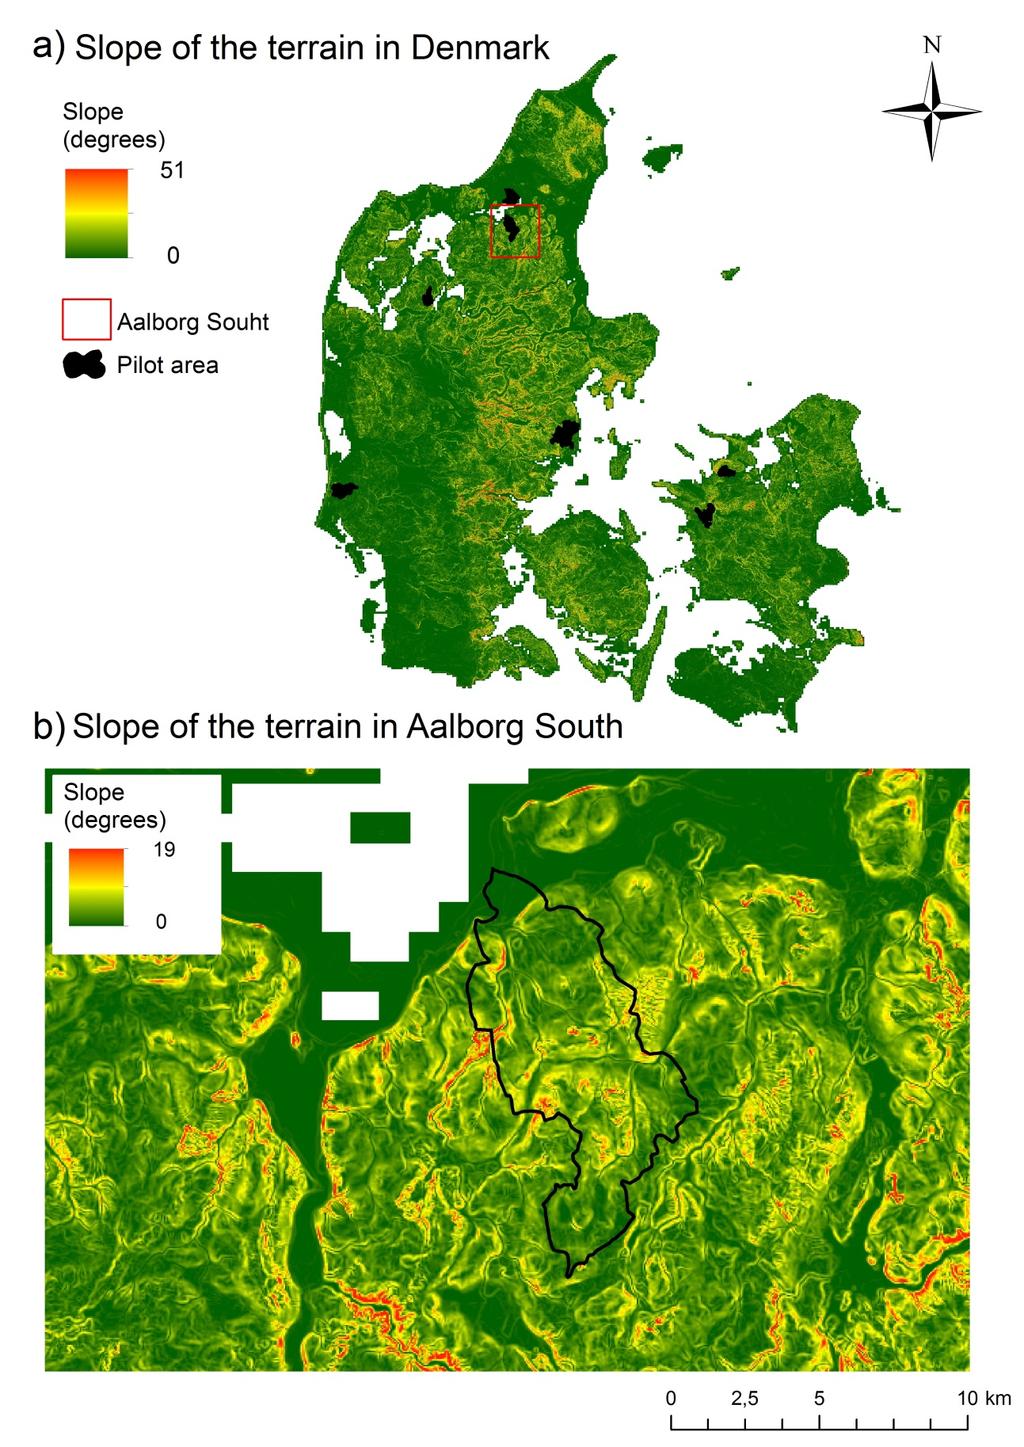 Map 2: Slope of the terrain in Denmark (a) and in the